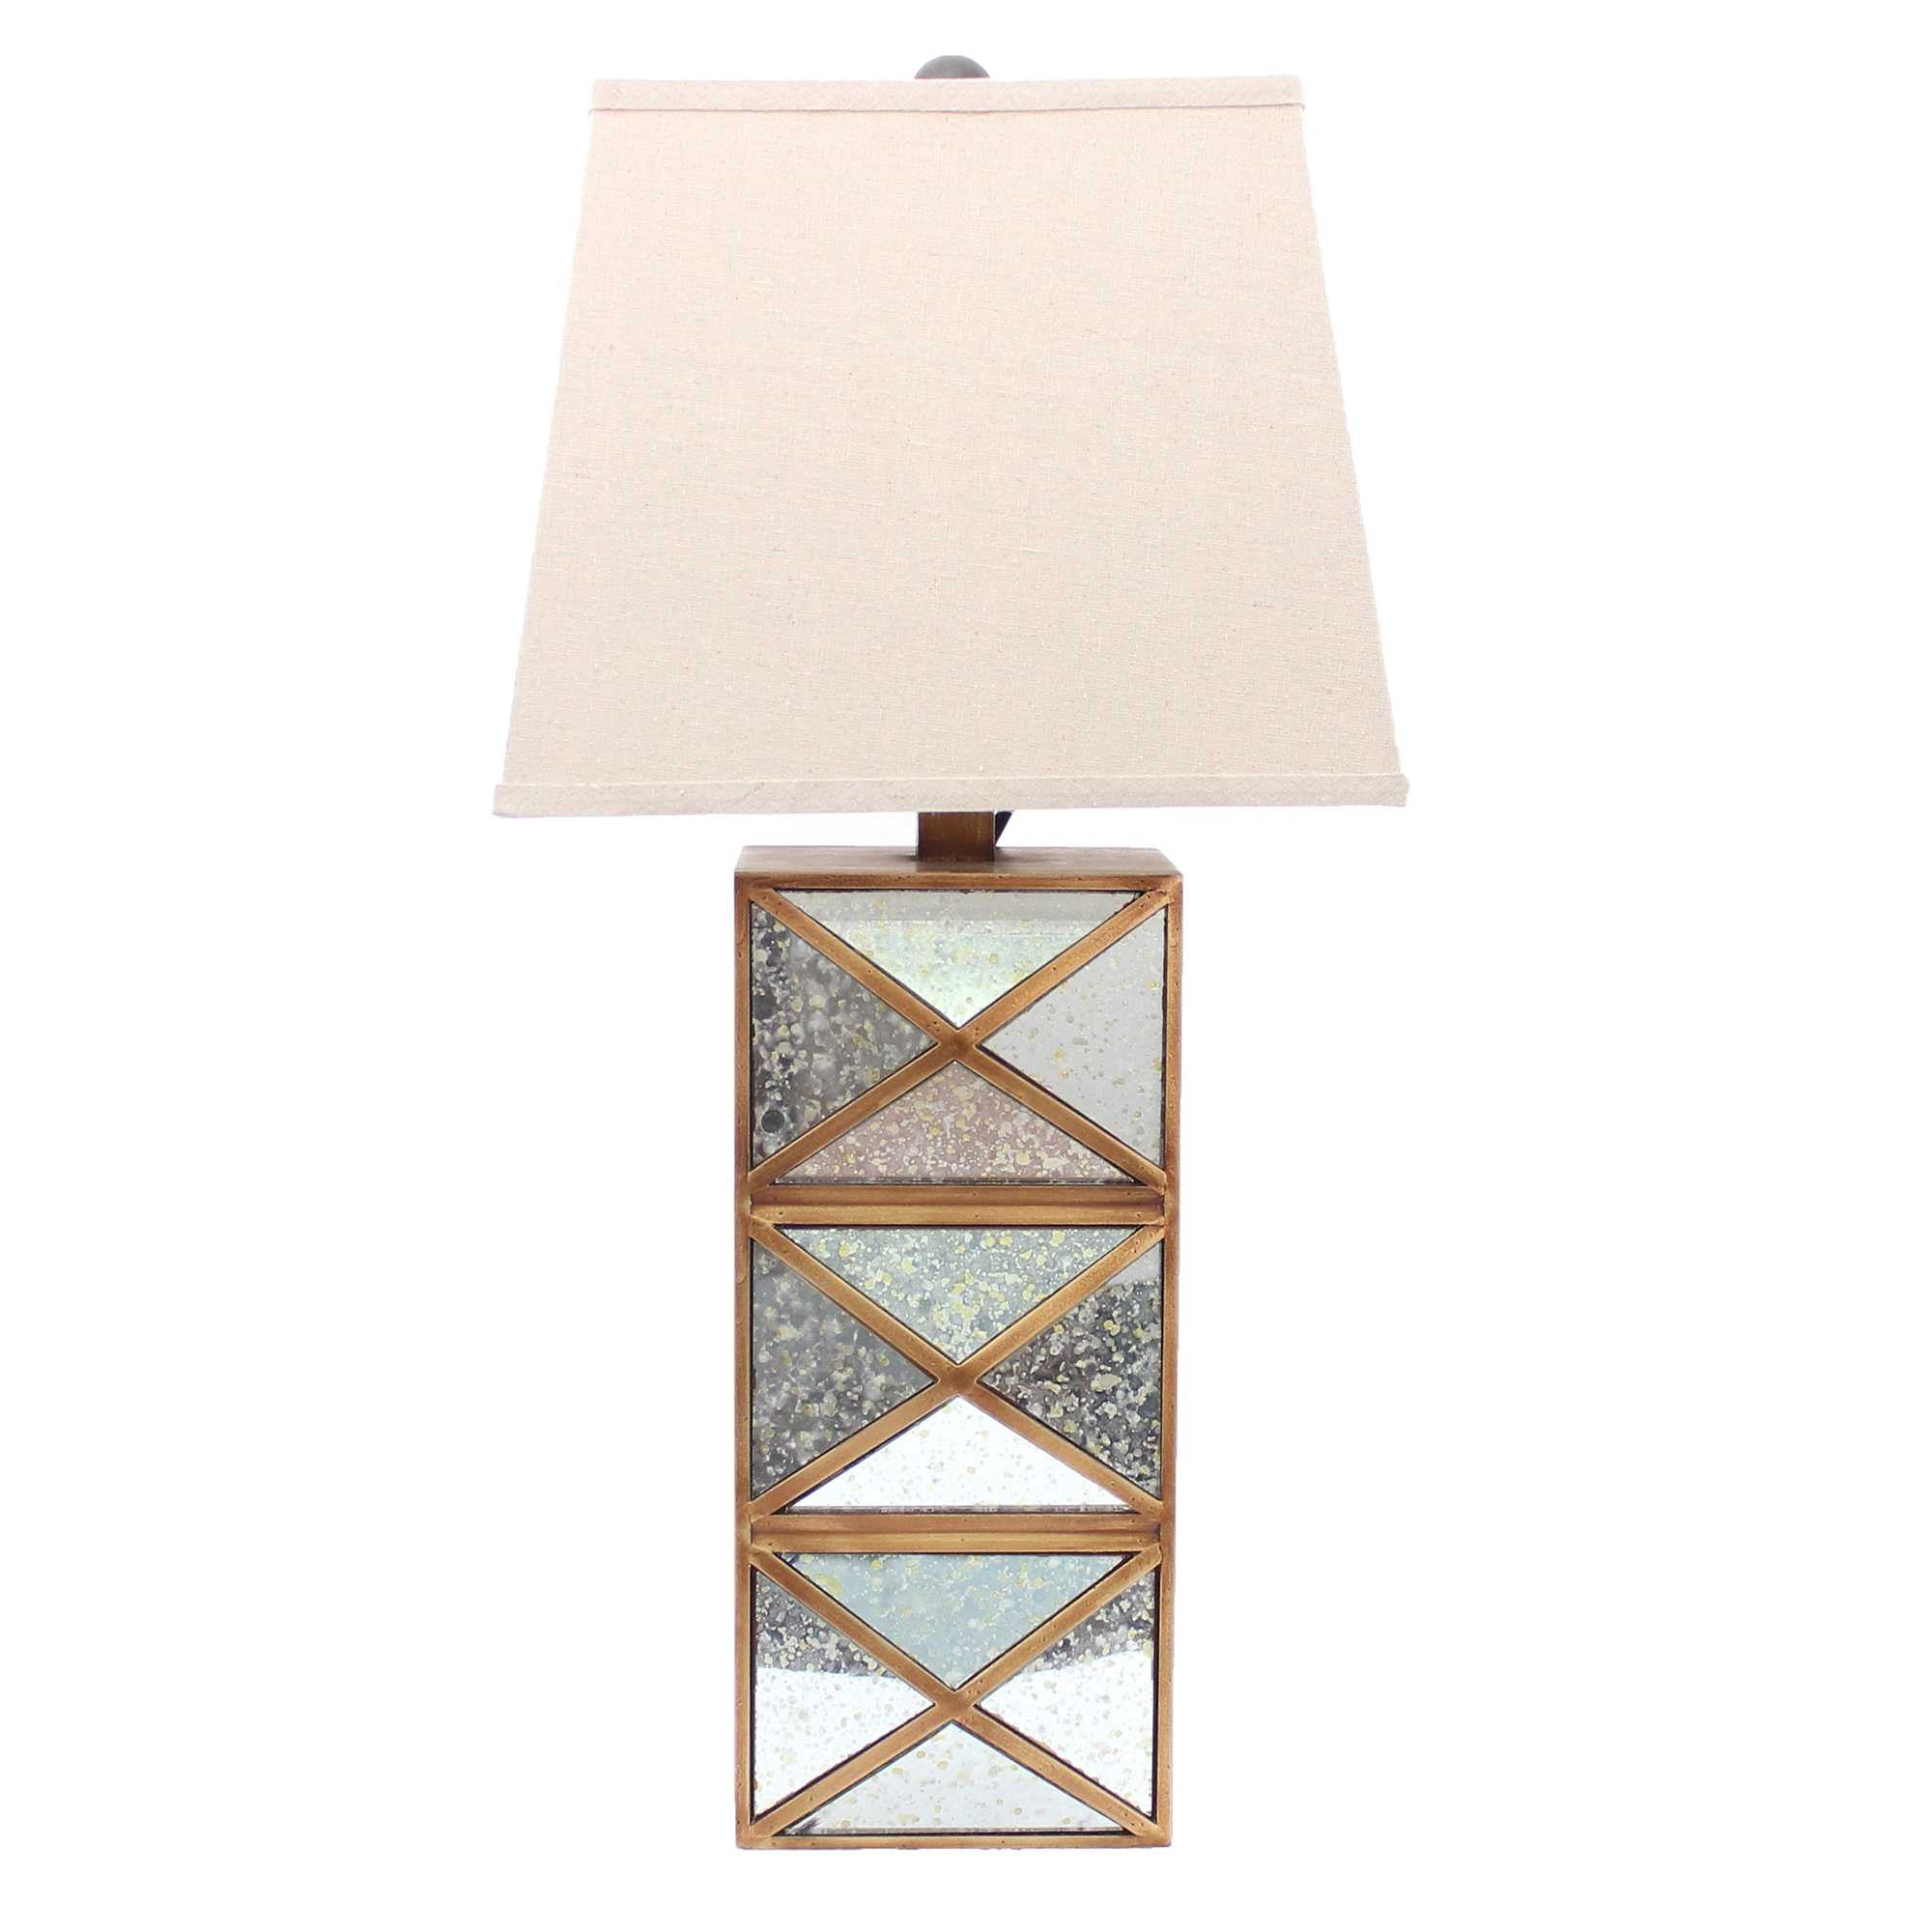 6.25 X 6.75 X 27.5 Gold Modern Illusionary Mirrored Base - Table Lamp - Tuesday Morning-Table Lamps